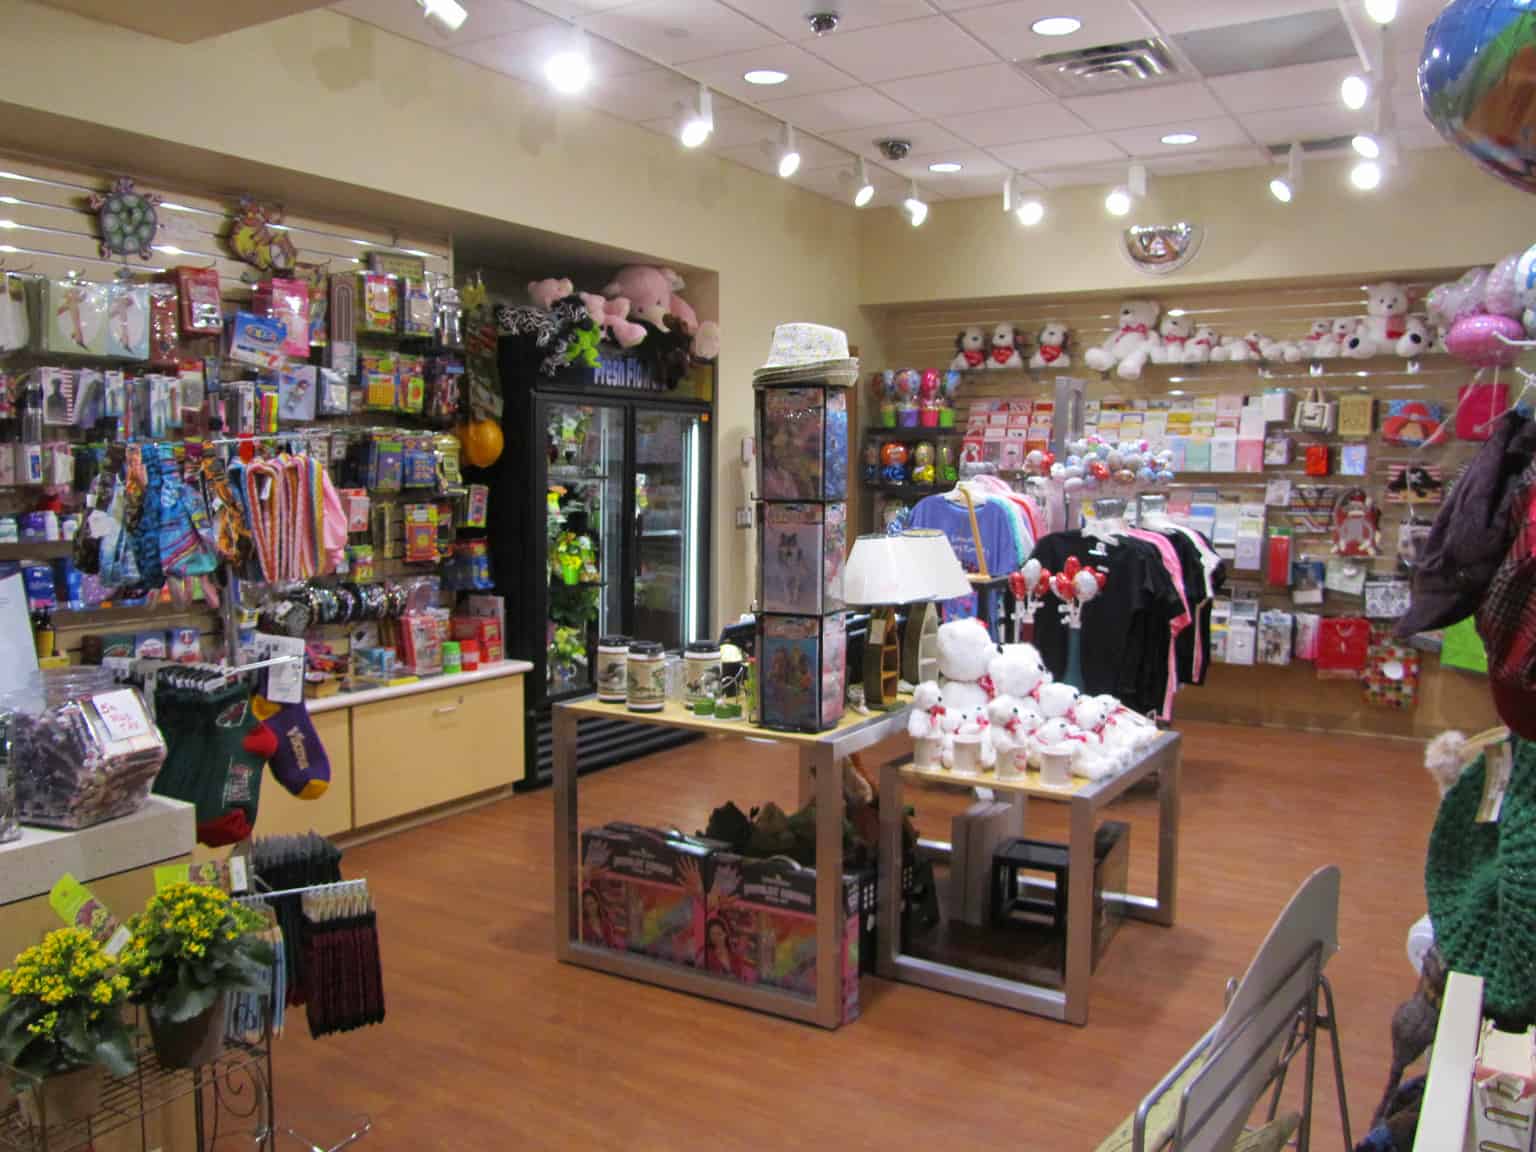 Hospital Store, Gift Shop, Flower Shop and Candy Shop.